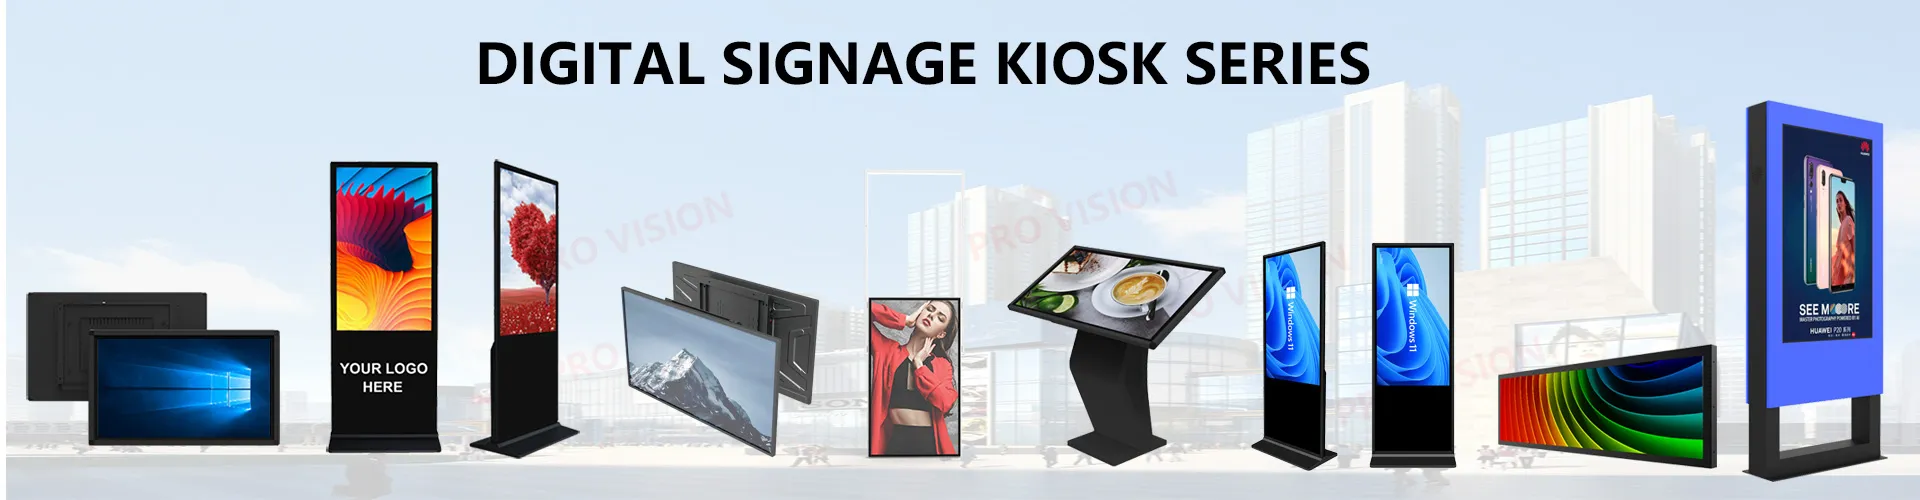 55 Inch Android Ourdoor Digital Signage